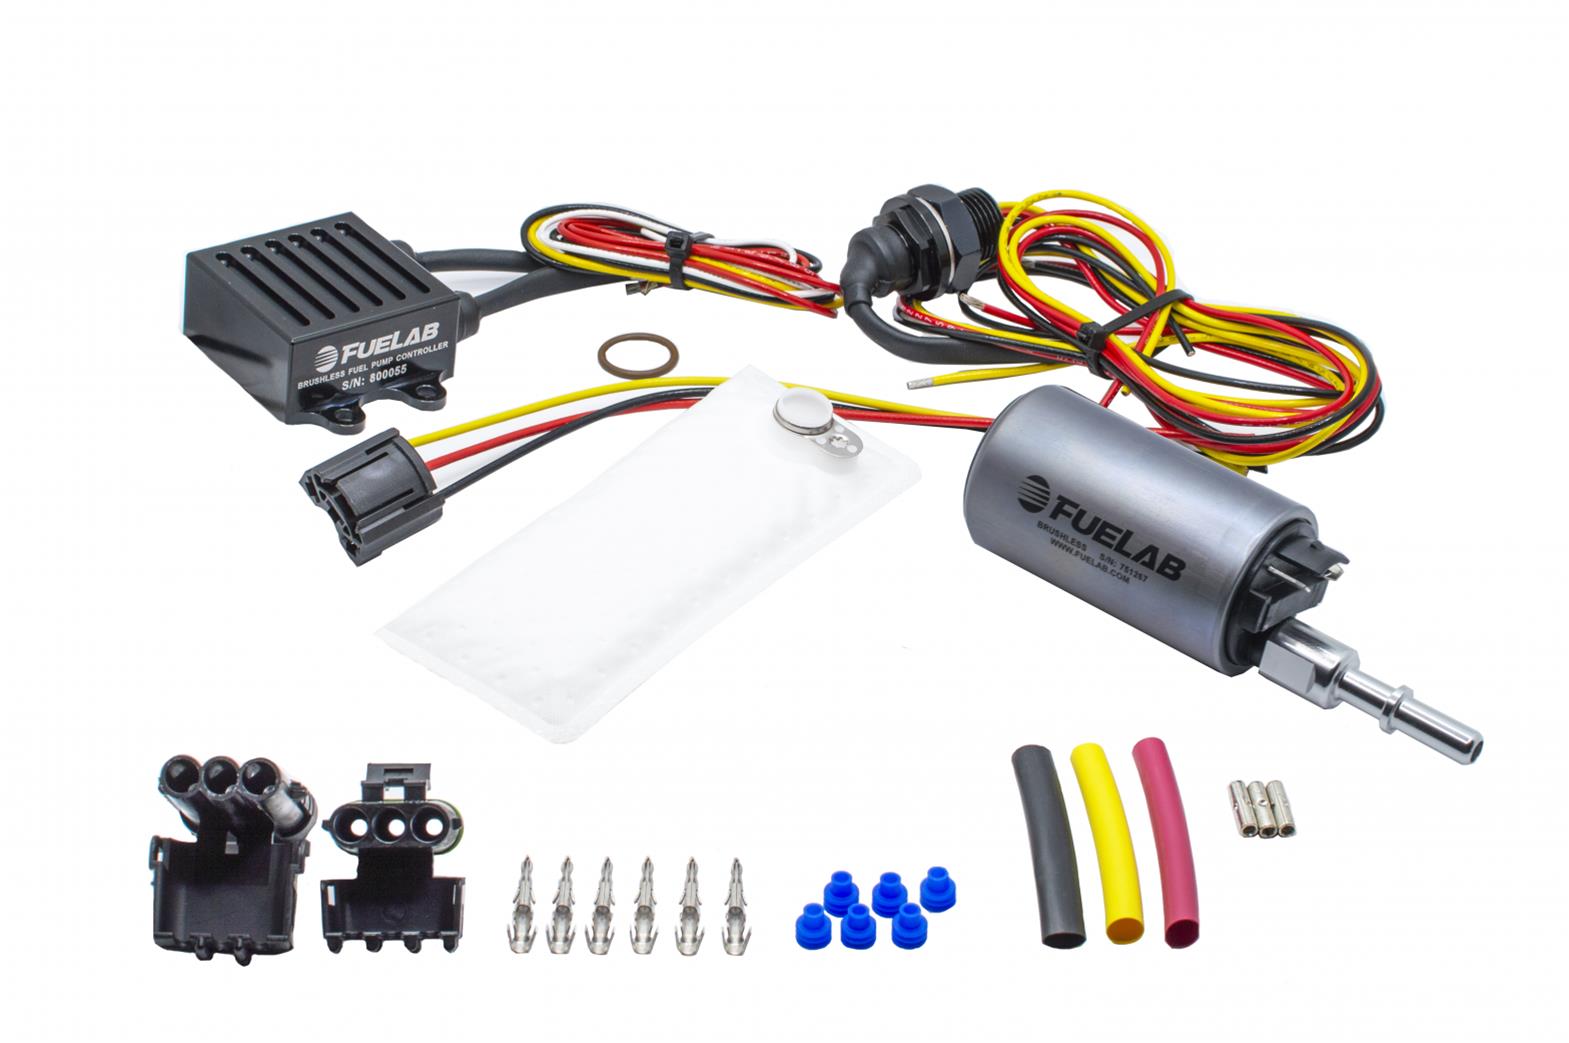 FUELAB 25312 In-Tank Brushless Fuel Pump Kit 500 LPH with 5/16 SAE Outlet Photo-0 